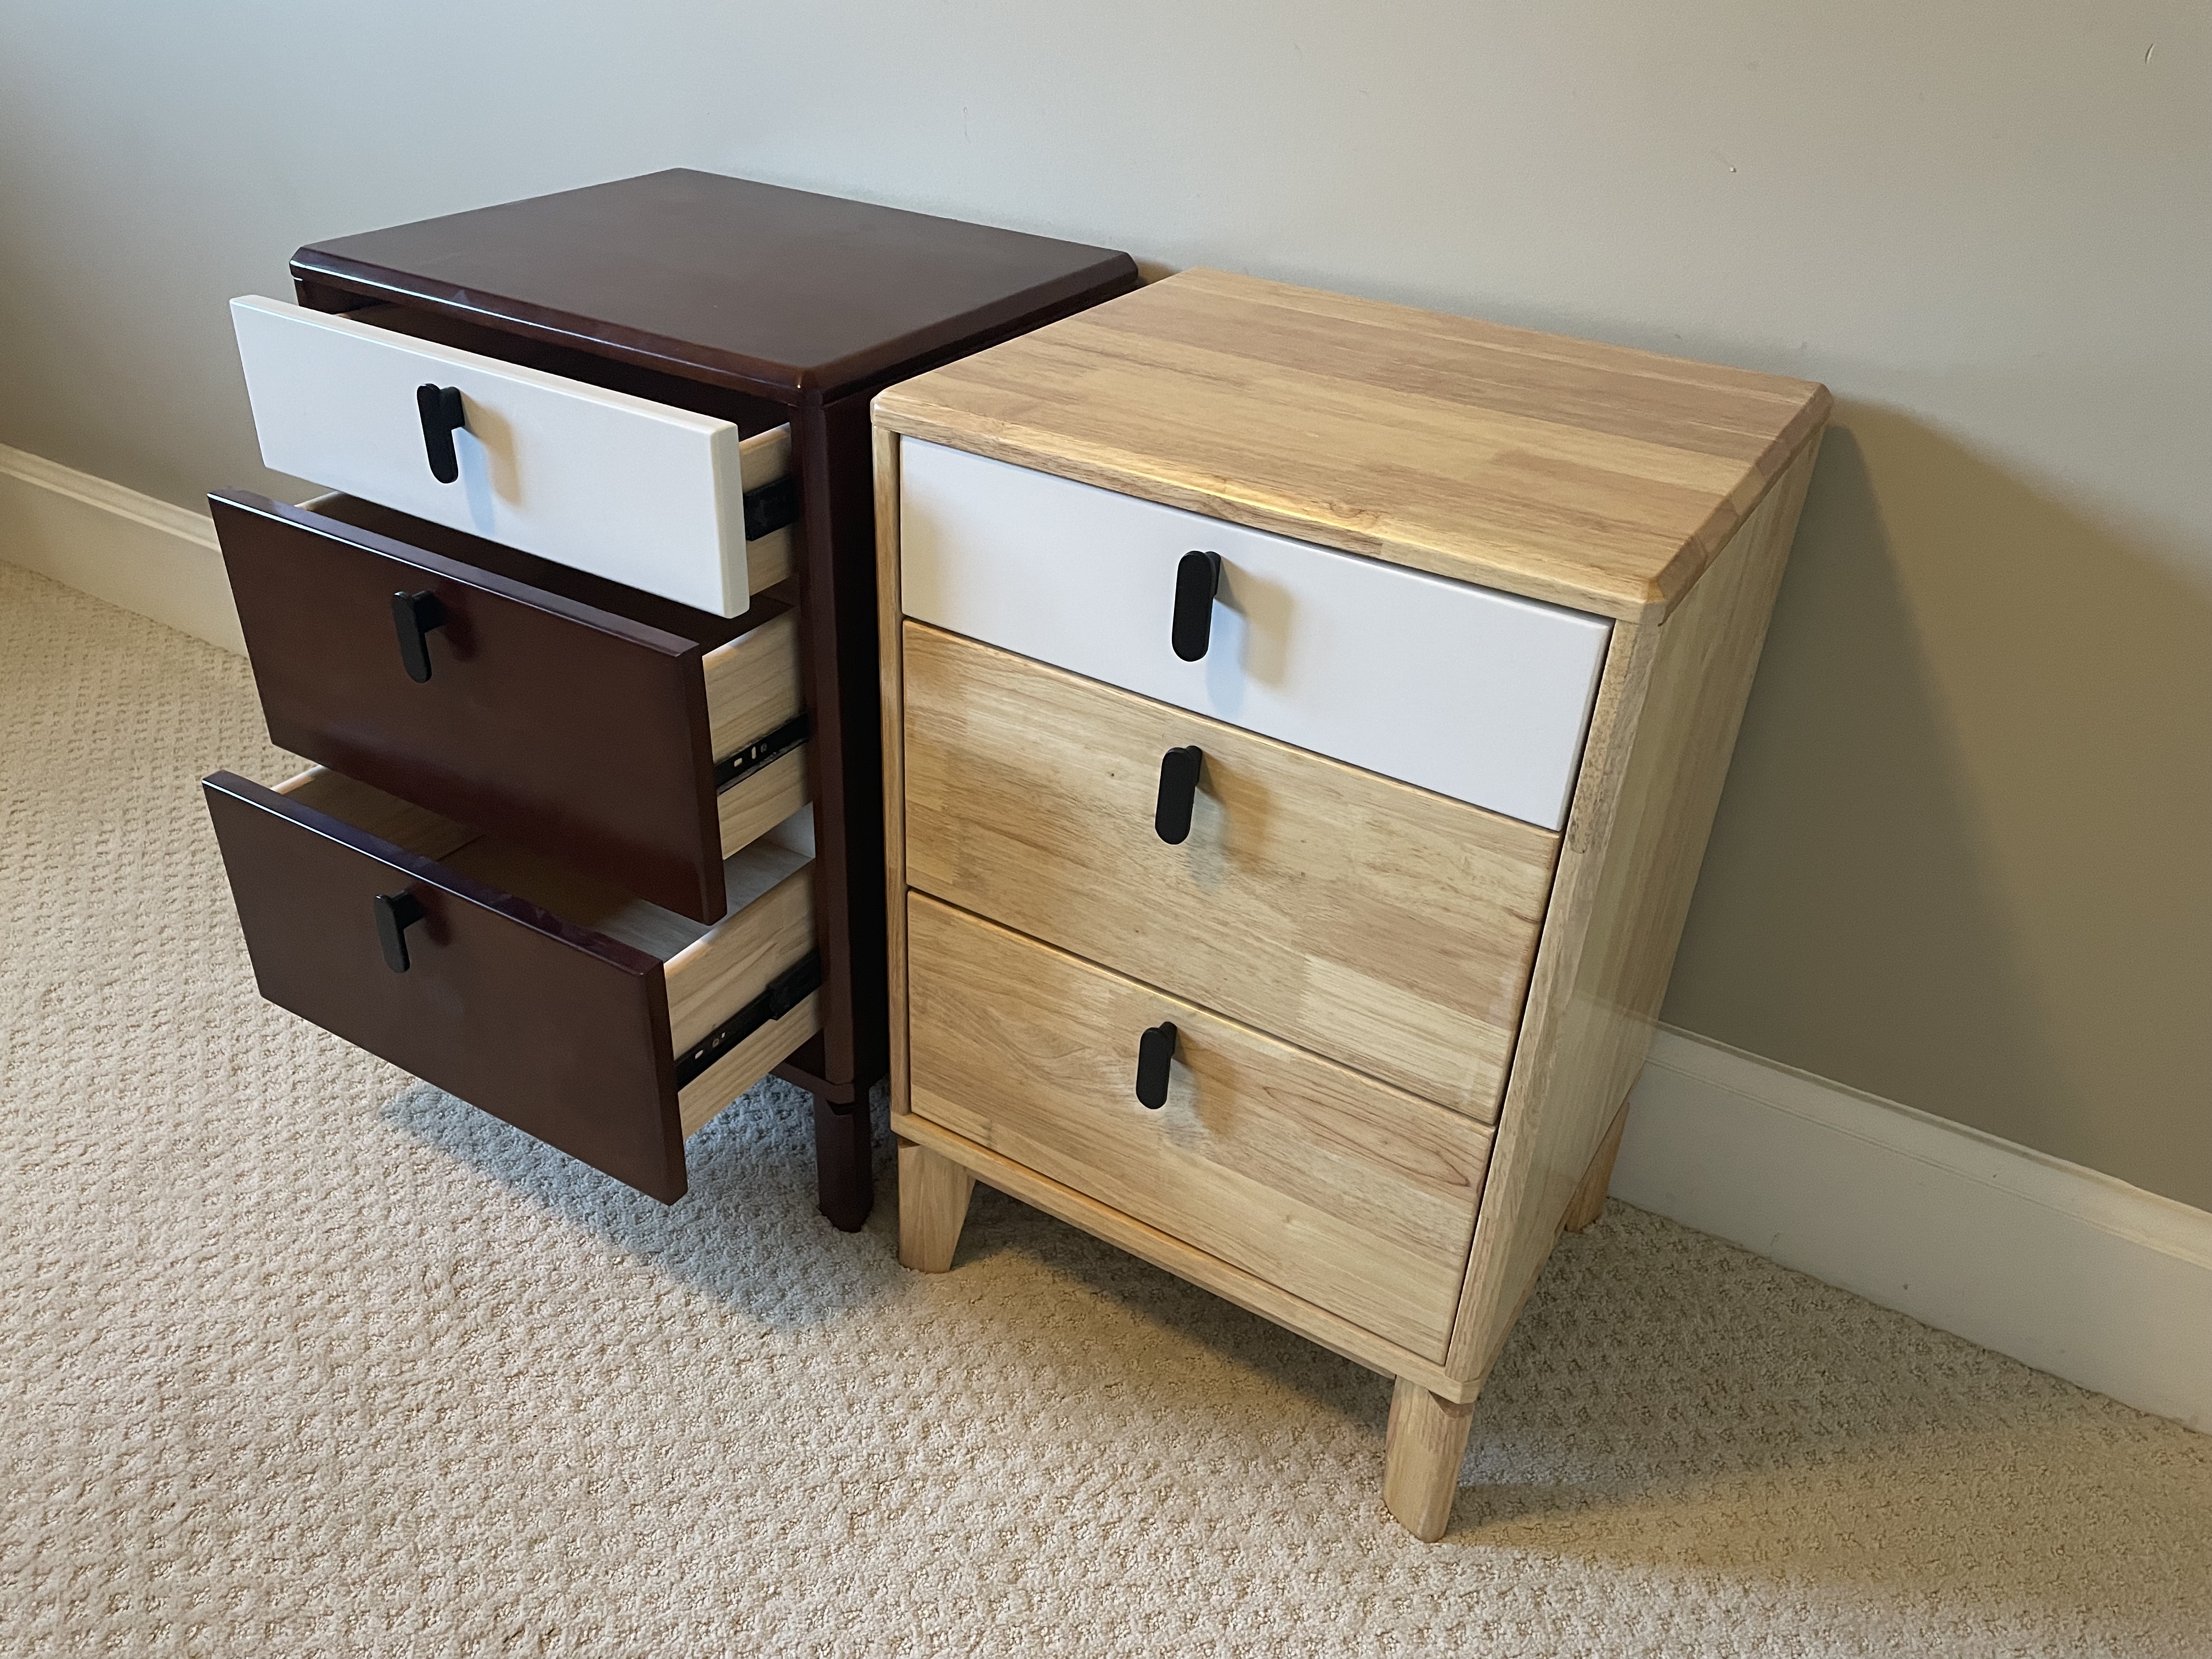 3 drawers of chest (TB-3#)